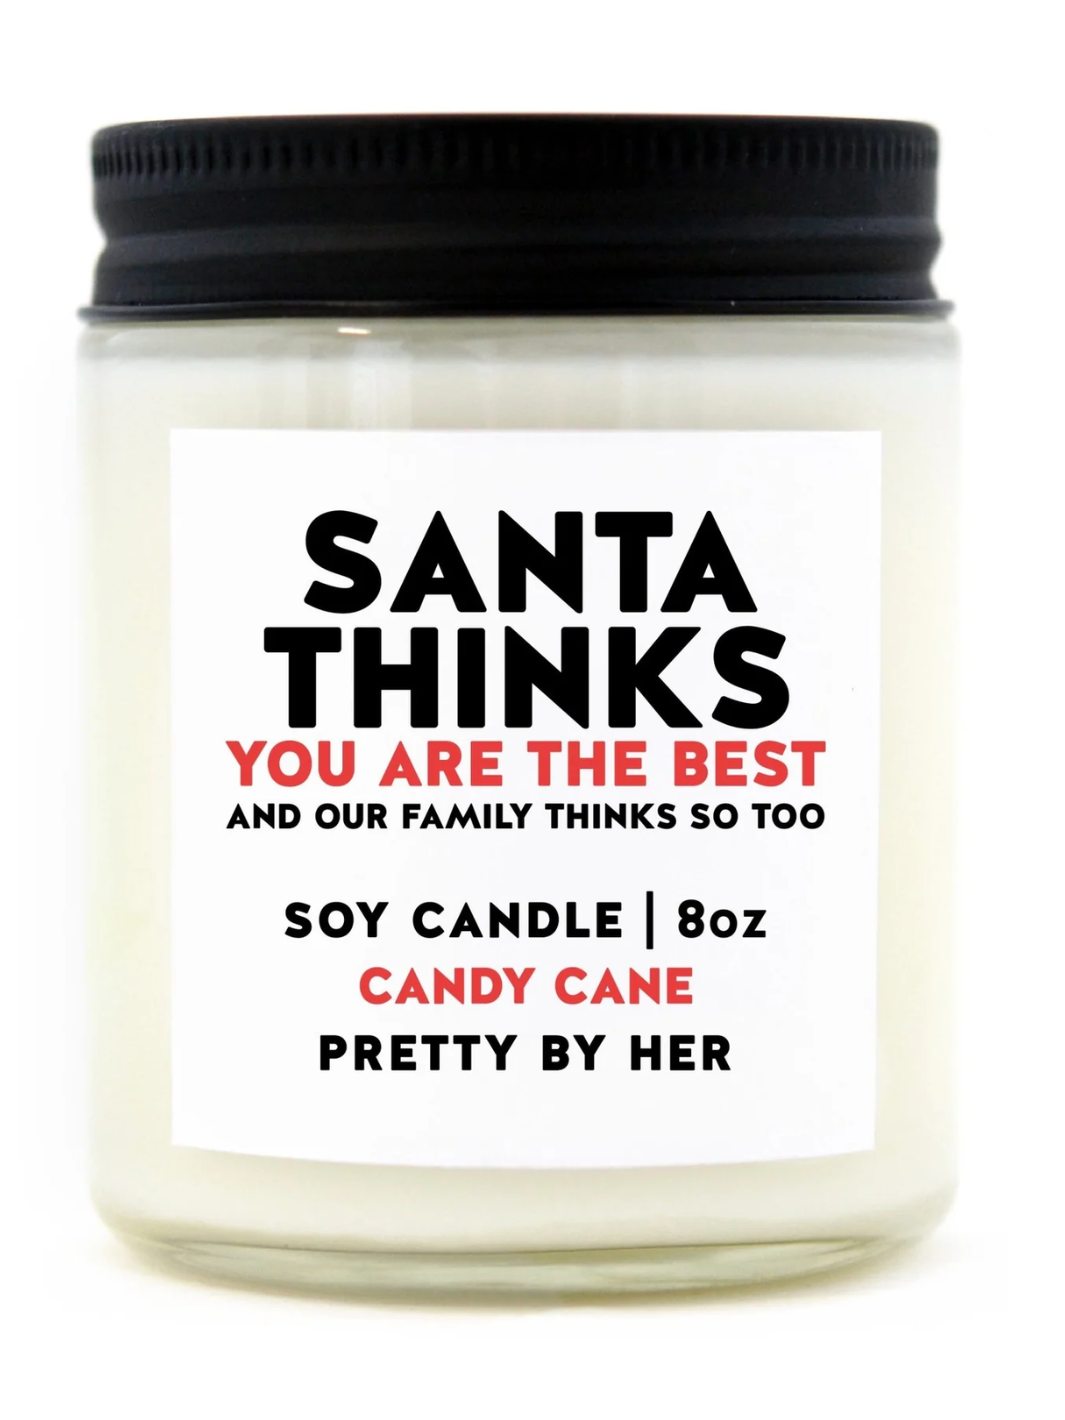 Santa Thinks You are the Best Candle